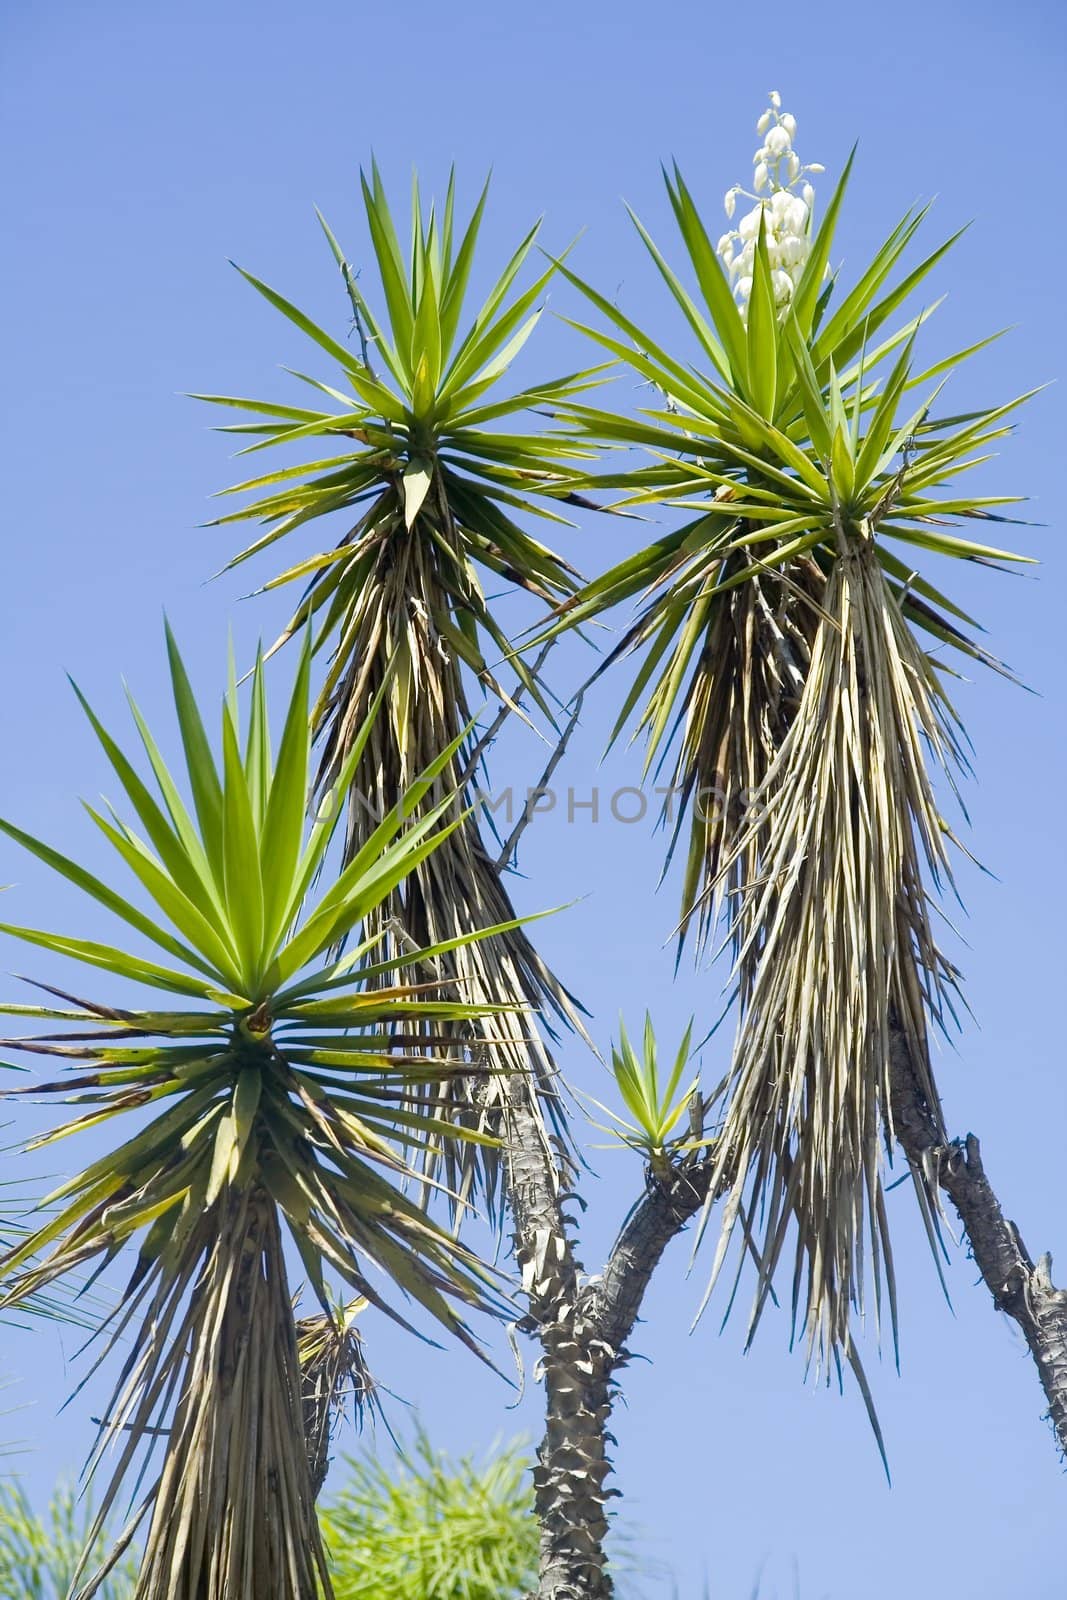 Flowering tropical plant yucca in nature on a background of blue sky